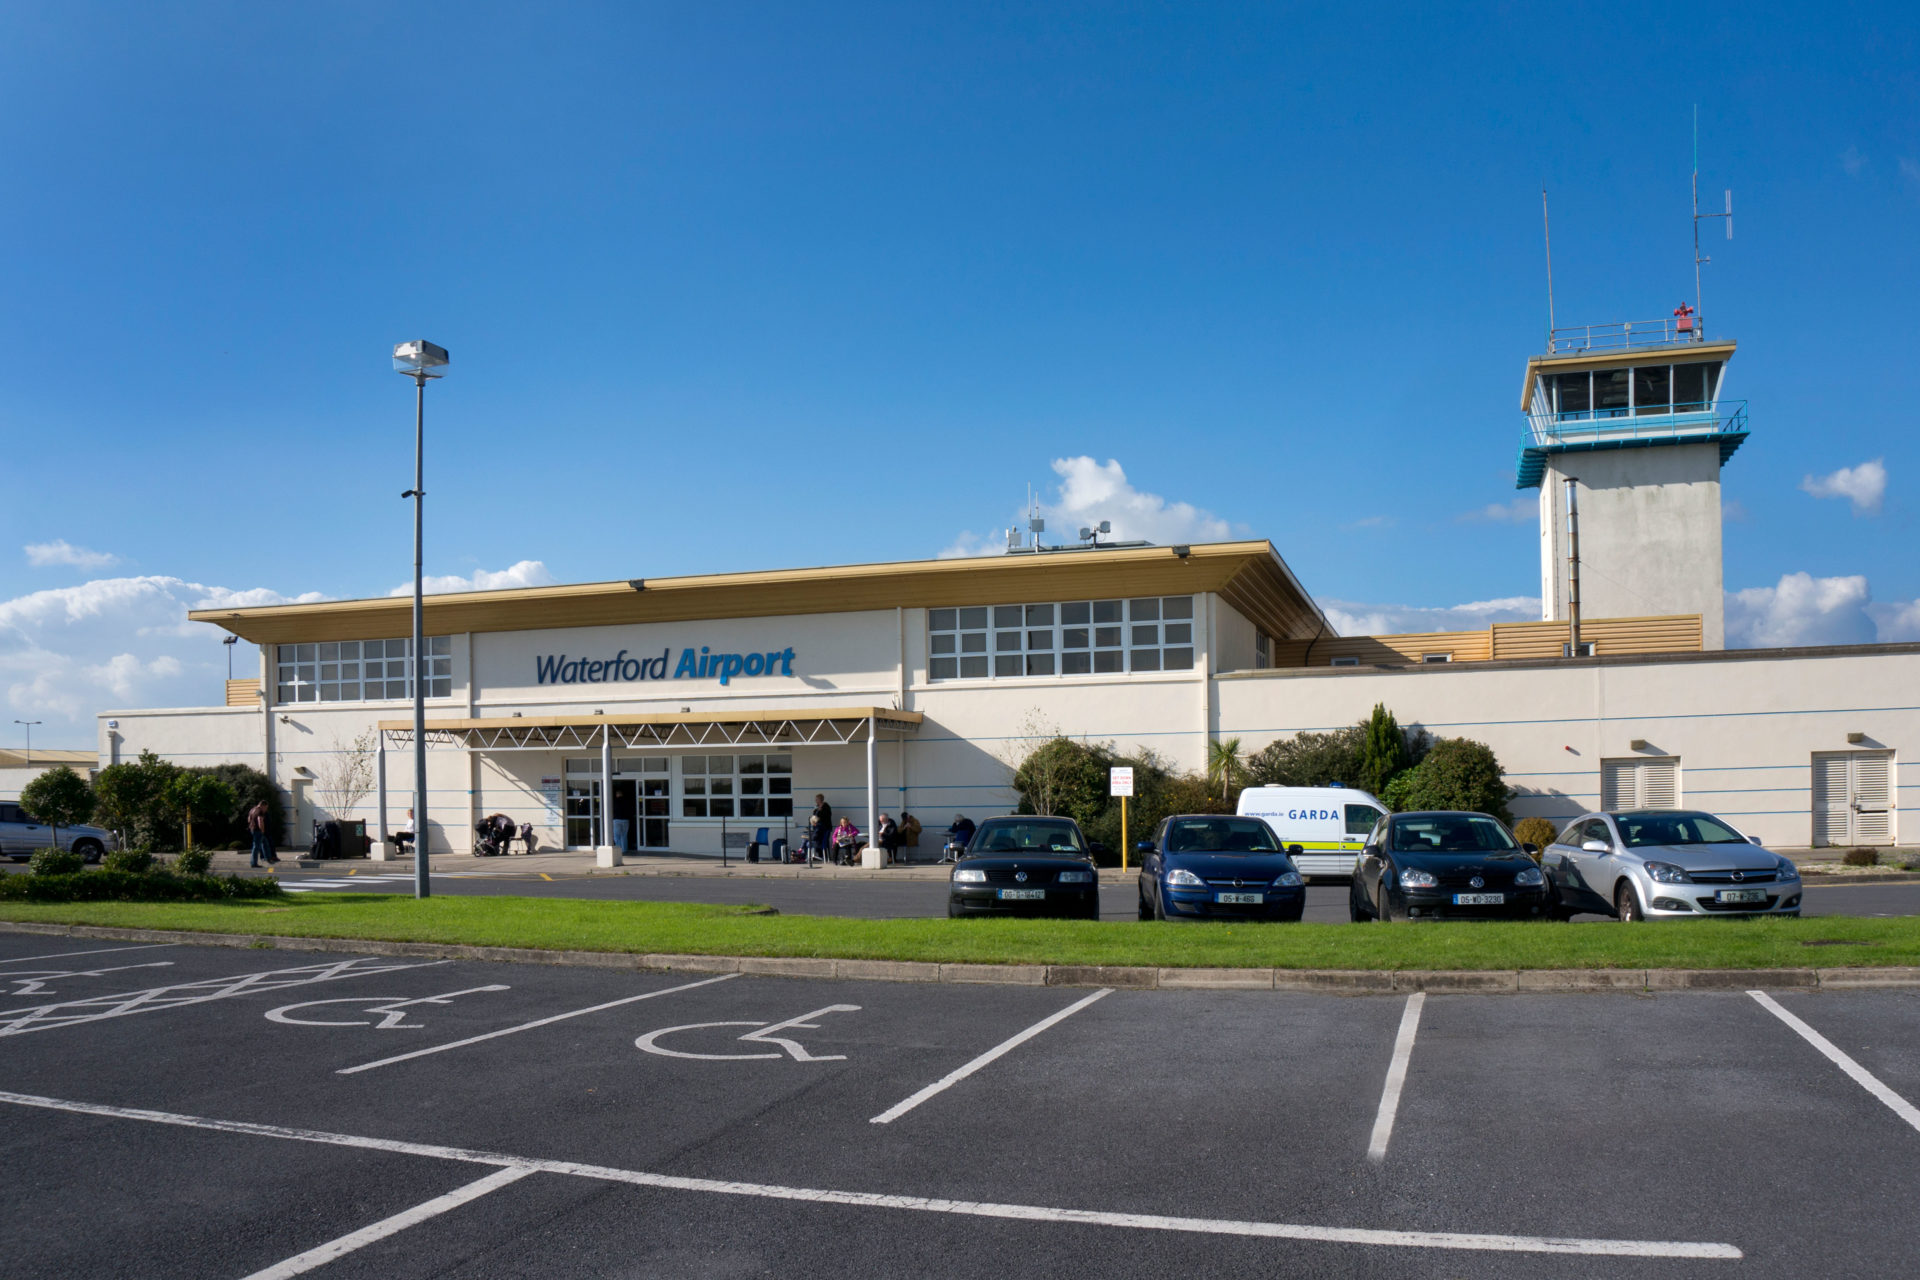 Waterford Airport runway expansion moves one step closer with €12m investment